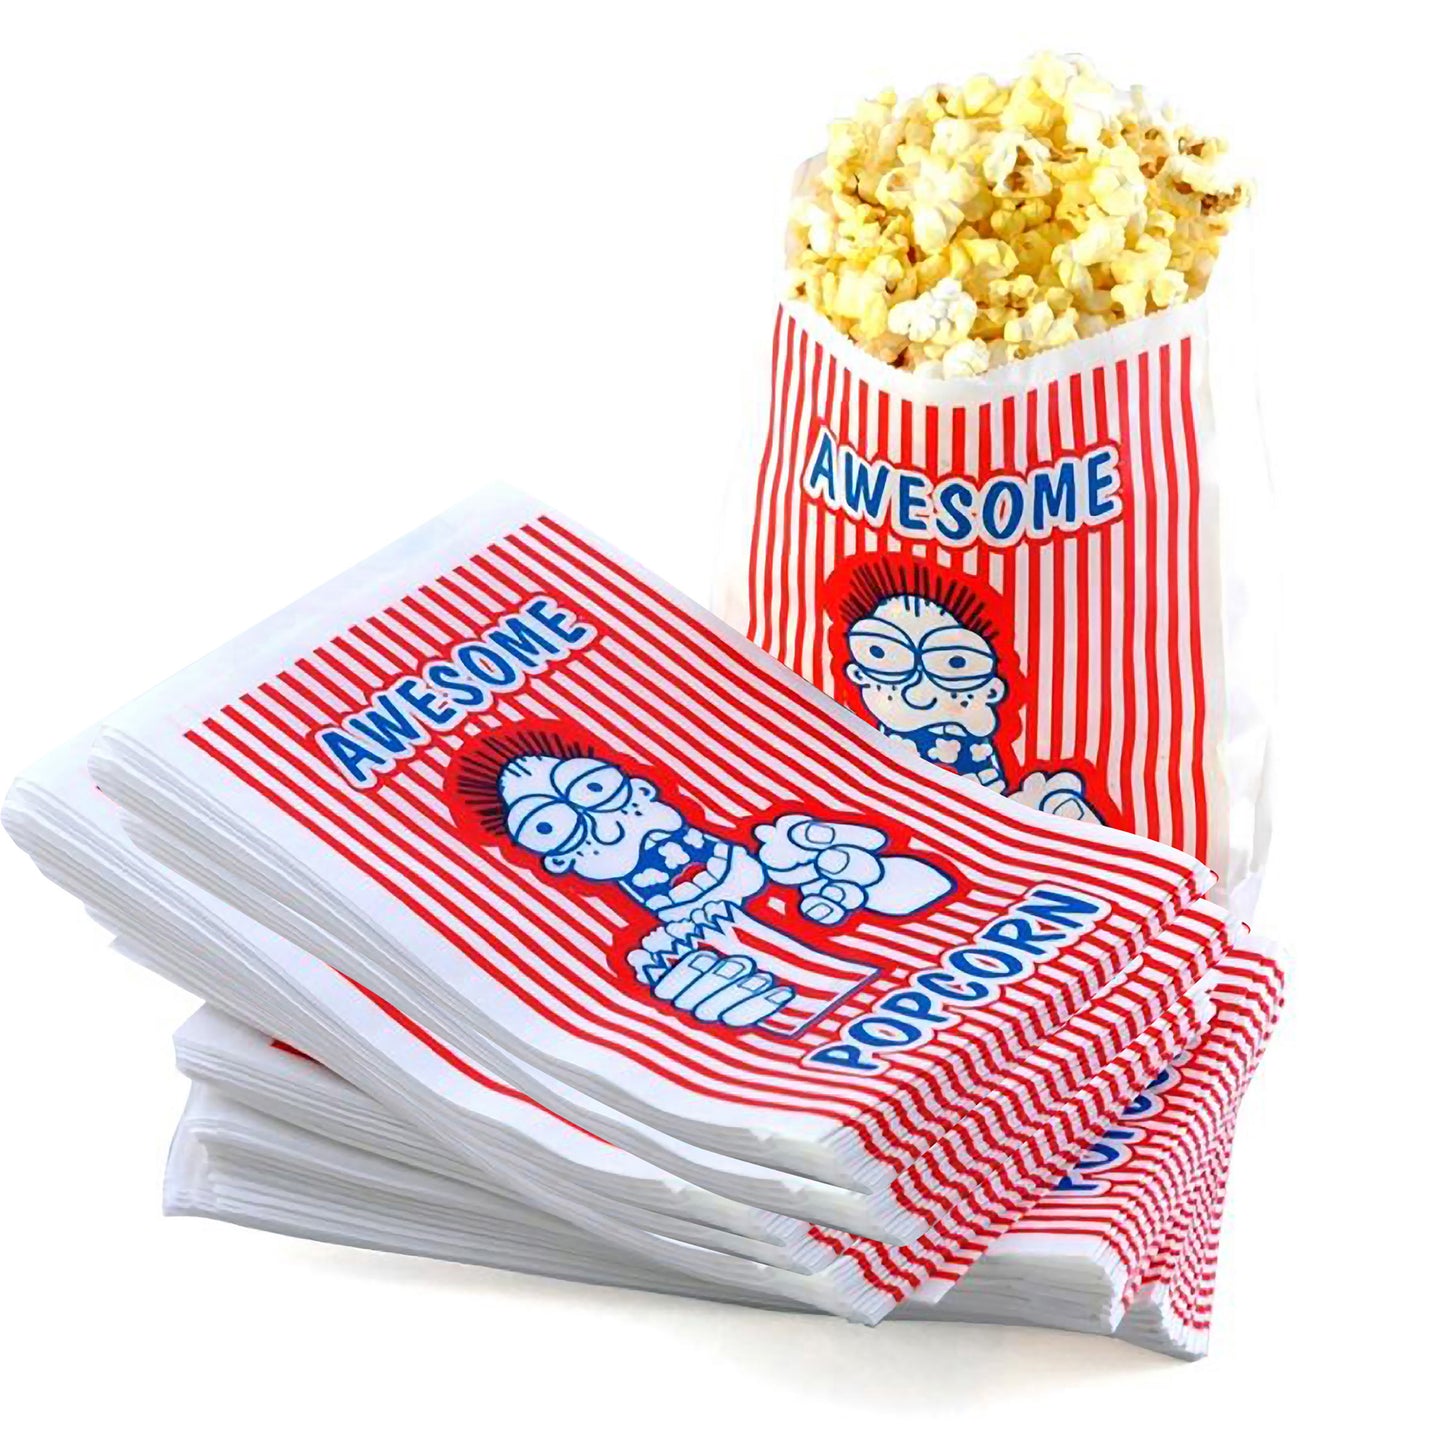 100 Popcorn Bags and 10 Ounce All-in-One Popcorn Packs  – Case of 24